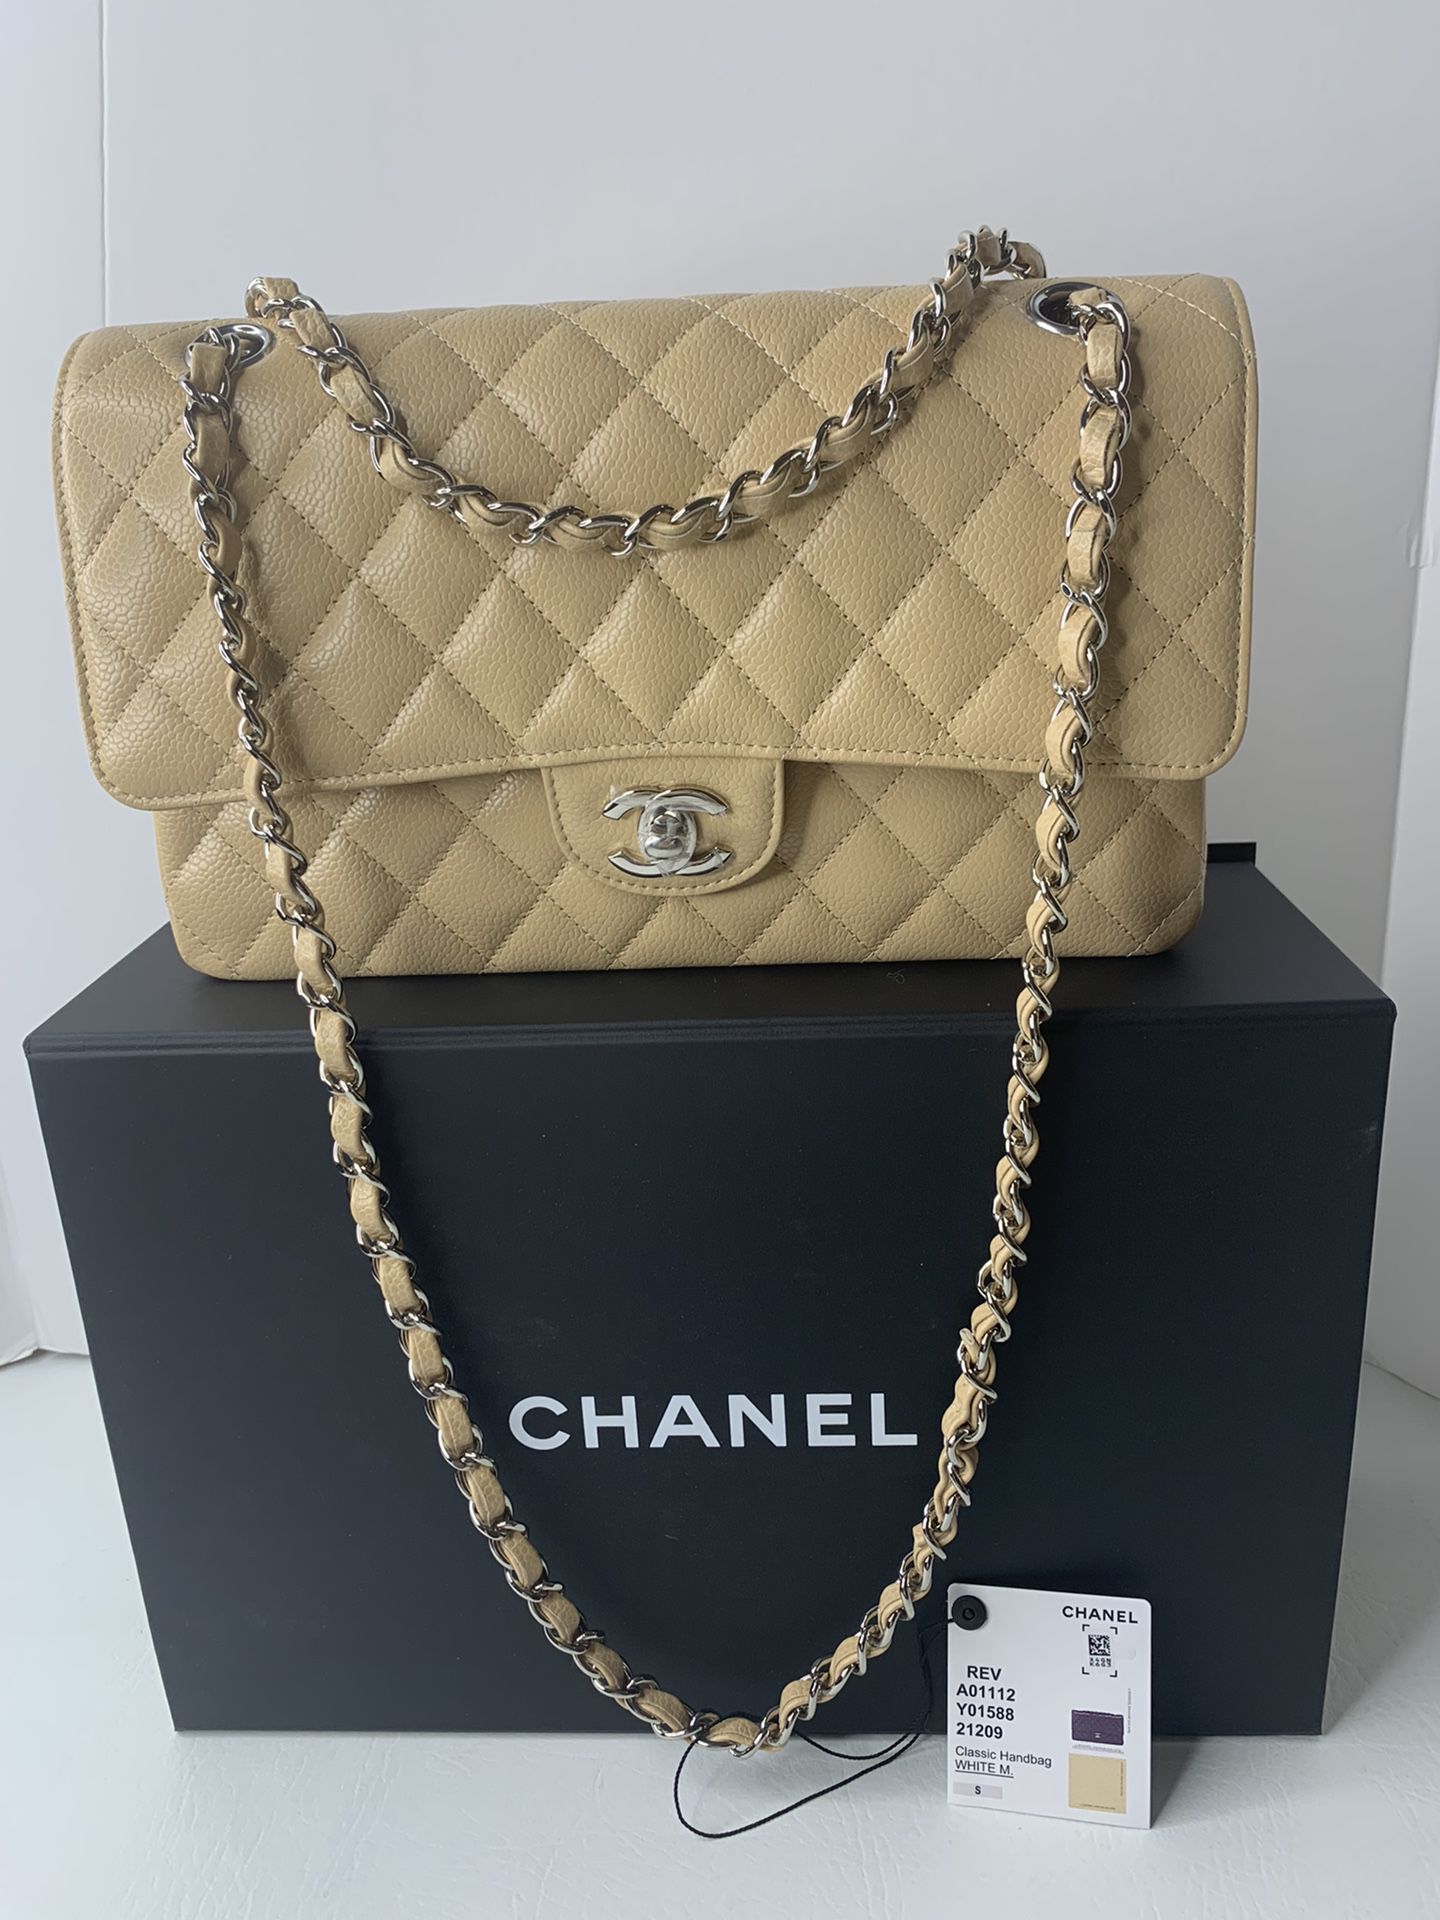 100% Authentic CHANEL medium Classic Caviar Flap Bag - Beige with SHW - NEW 